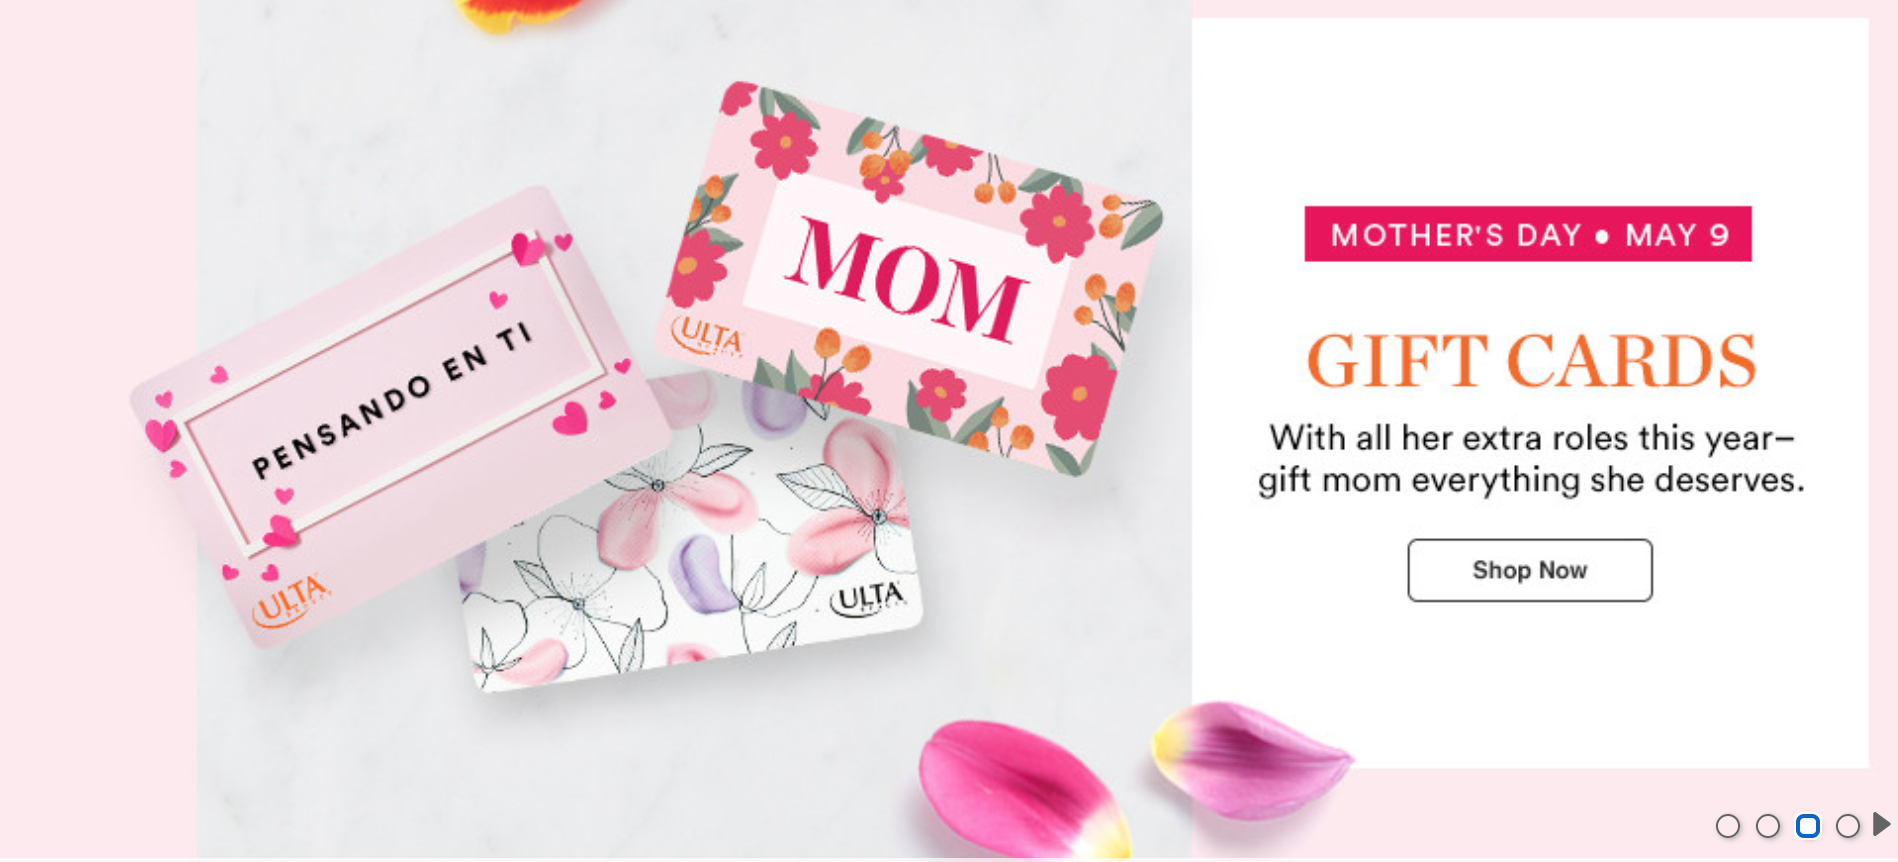 Mother’s Day Gifts at Ulta Beauty Tomoka Town Center